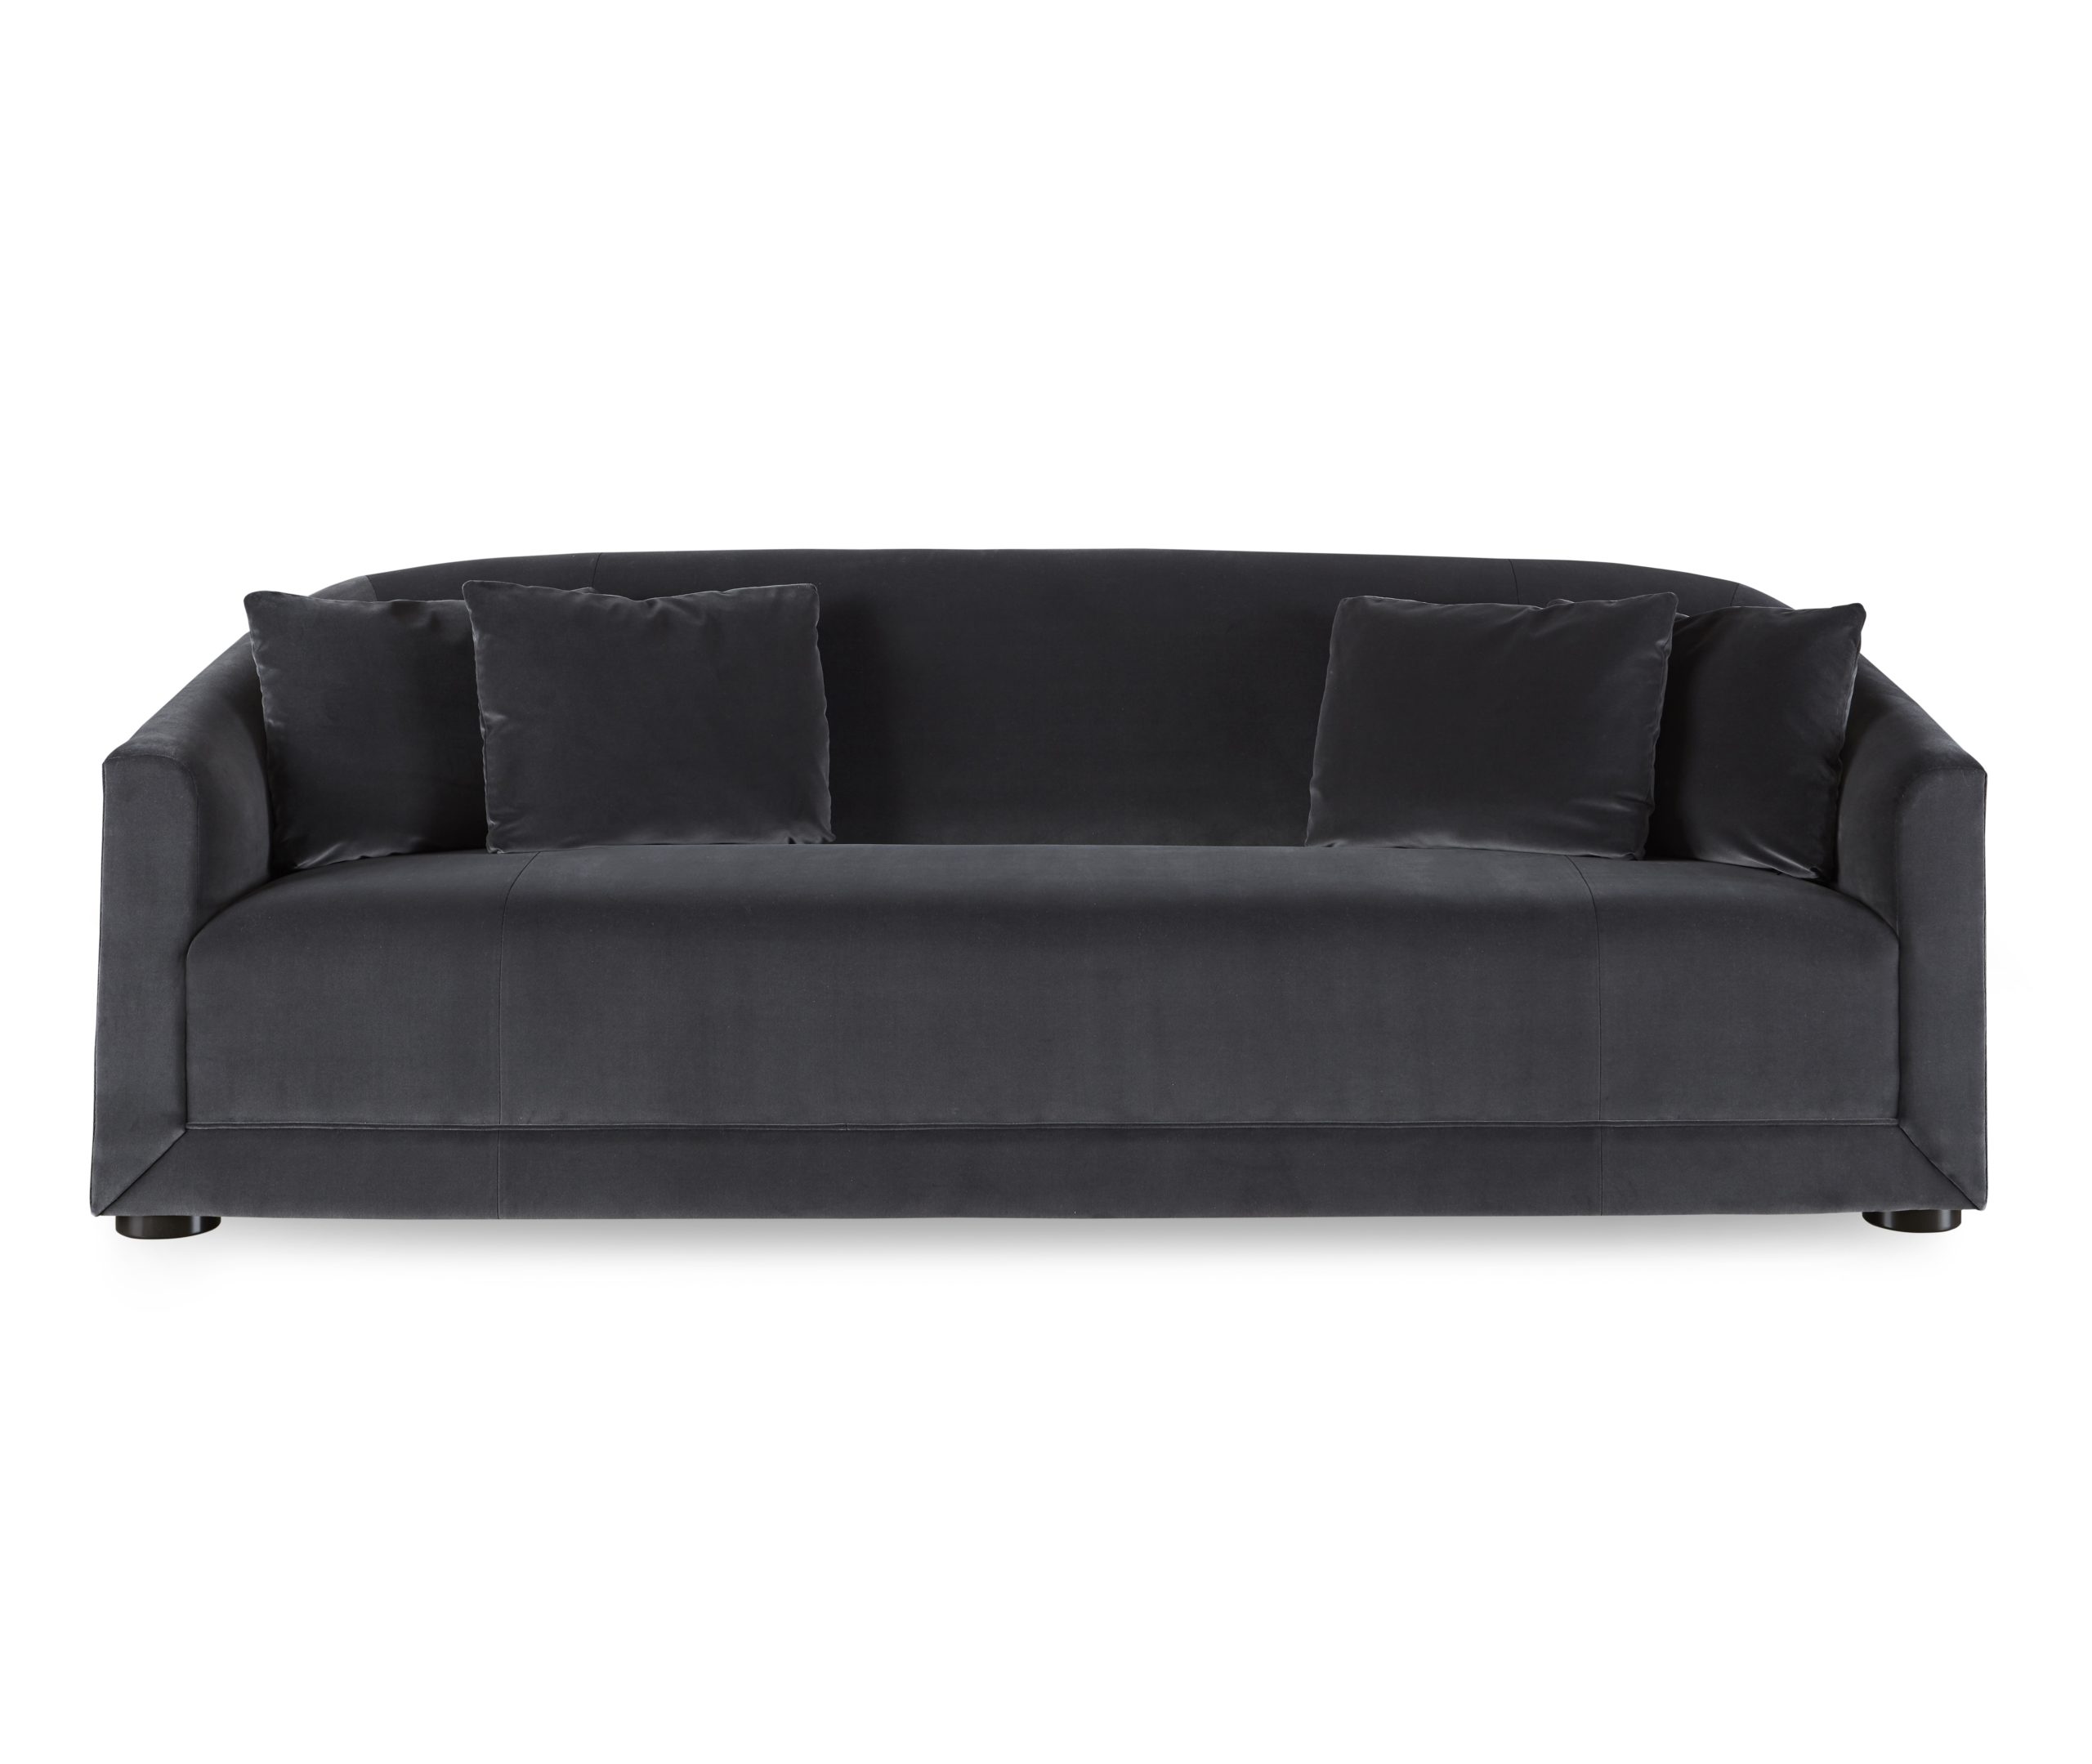 Baker_products_WNWN_anton_sofa_BAU3106S_FRONT-scaled-1